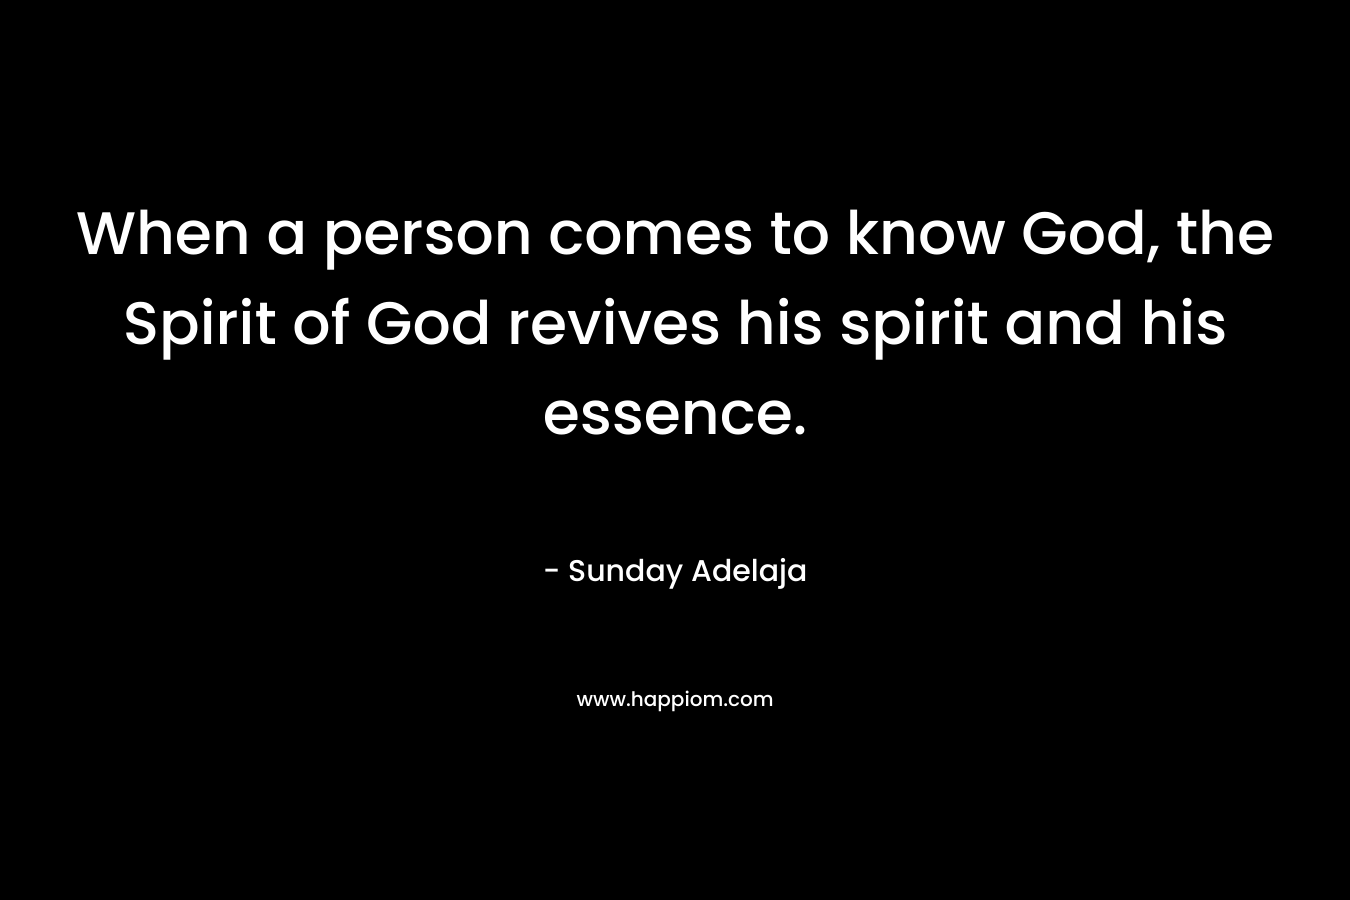 When a person comes to know God, the Spirit of God revives his spirit and his essence. – Sunday Adelaja